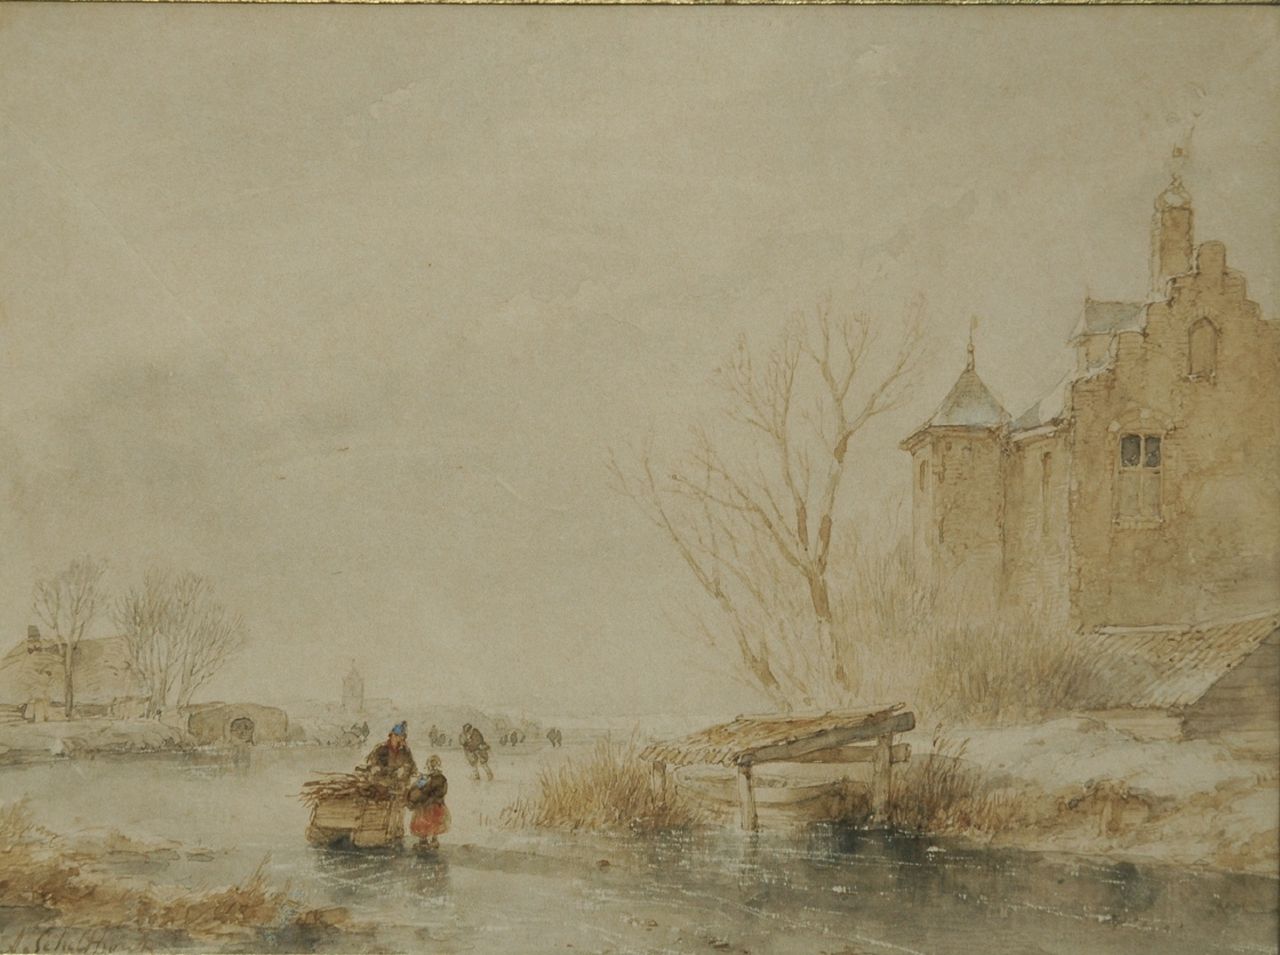 Schelfhout A.  | Andreas Schelfhout, Skaters on the ice by a fortified building, sepia and watercolour on paper 20.0 x 27.0 cm, signed l.l.